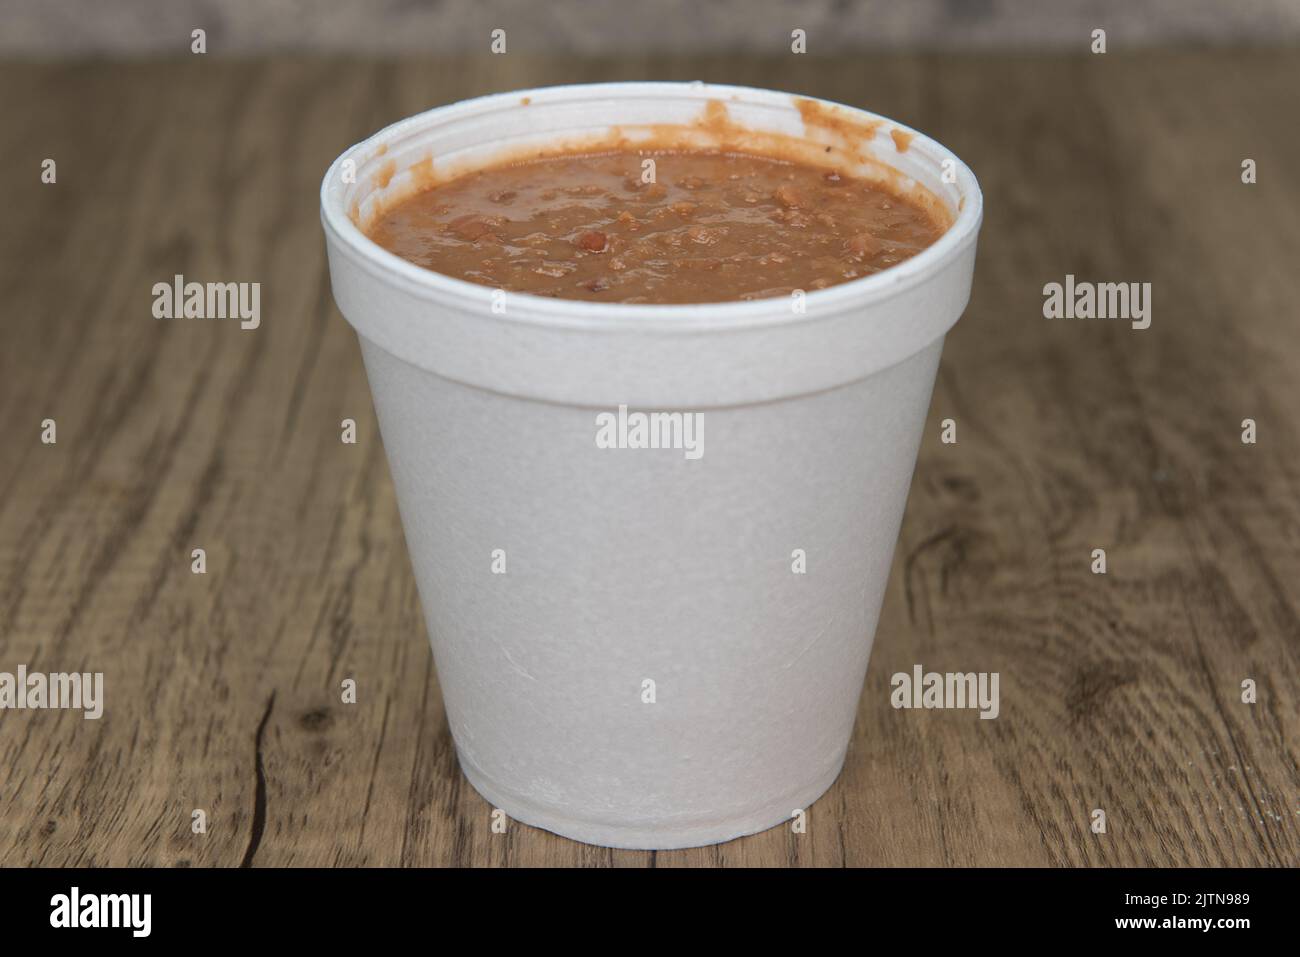 Mexican food needs a side order of authentic refried beans to complete the flavor of the meal. Stock Photo